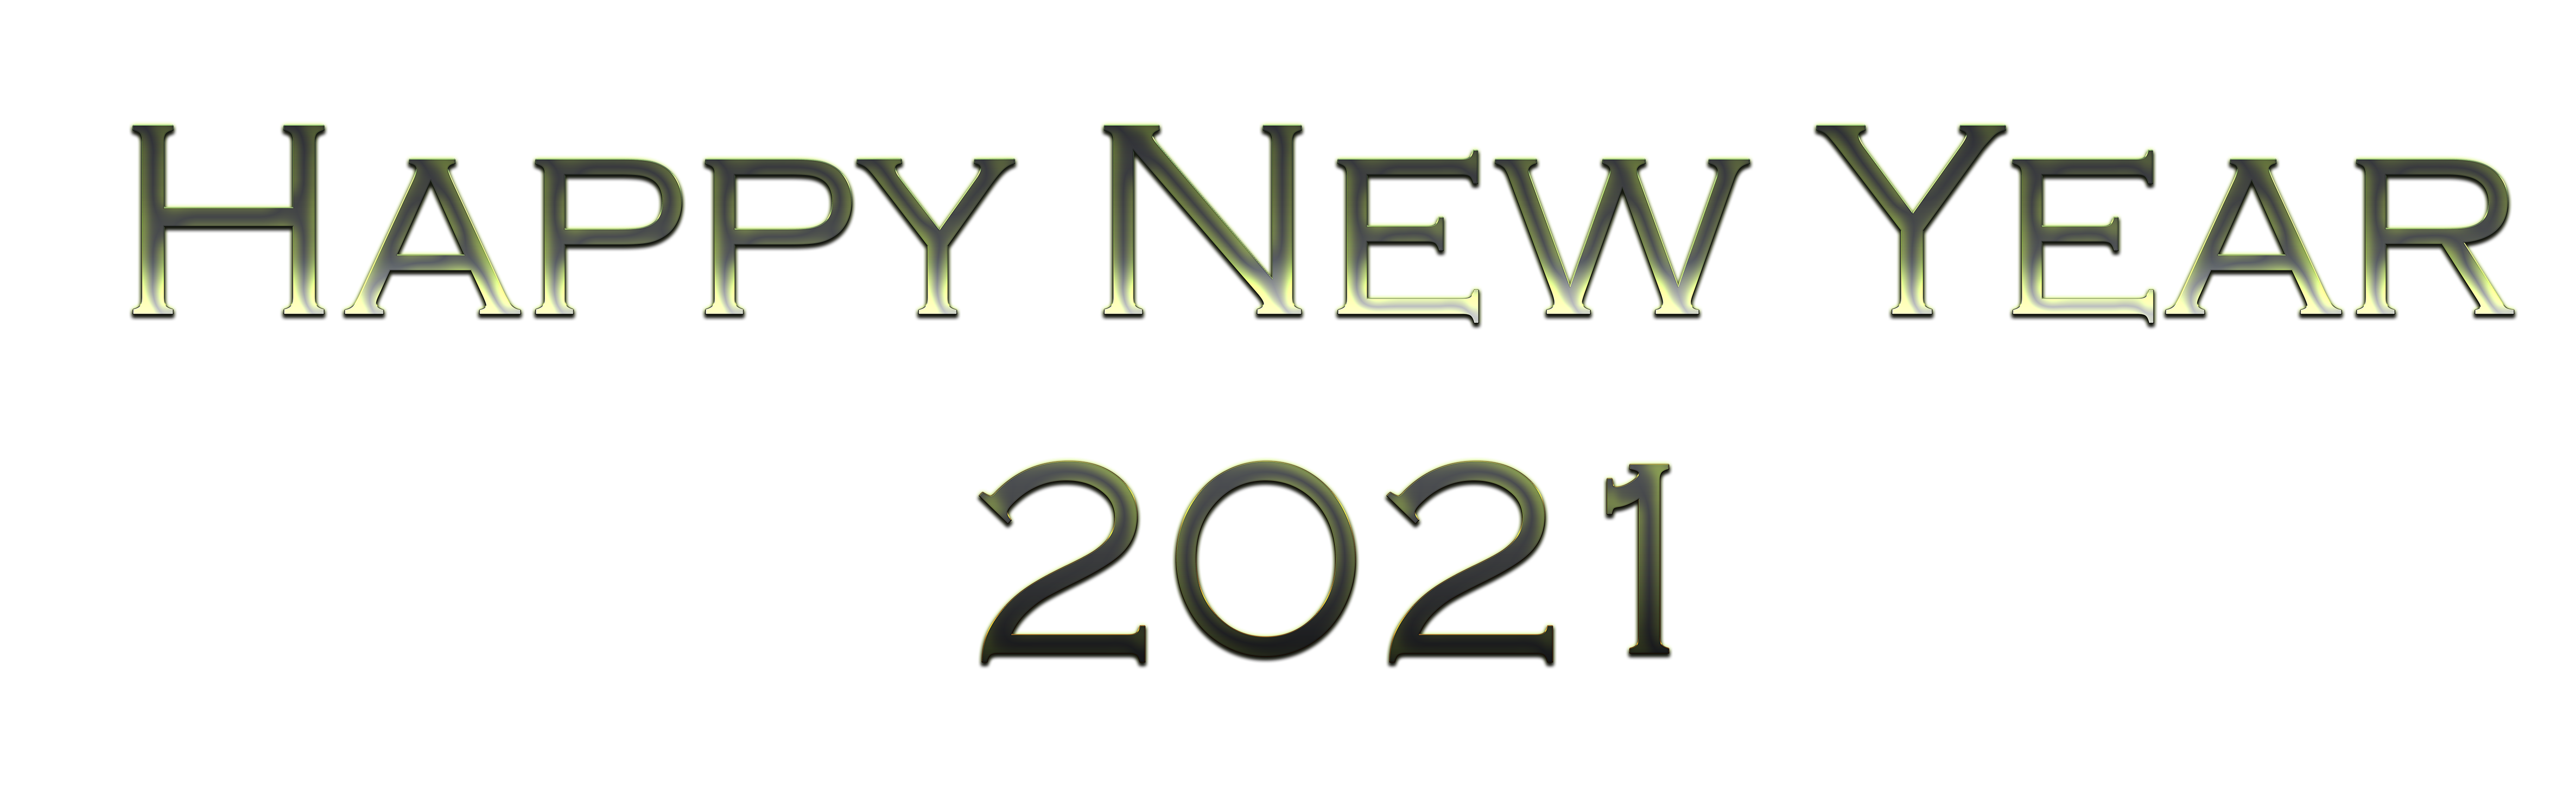 Year 2021 Happy Free Transparent Image HD PNG Image